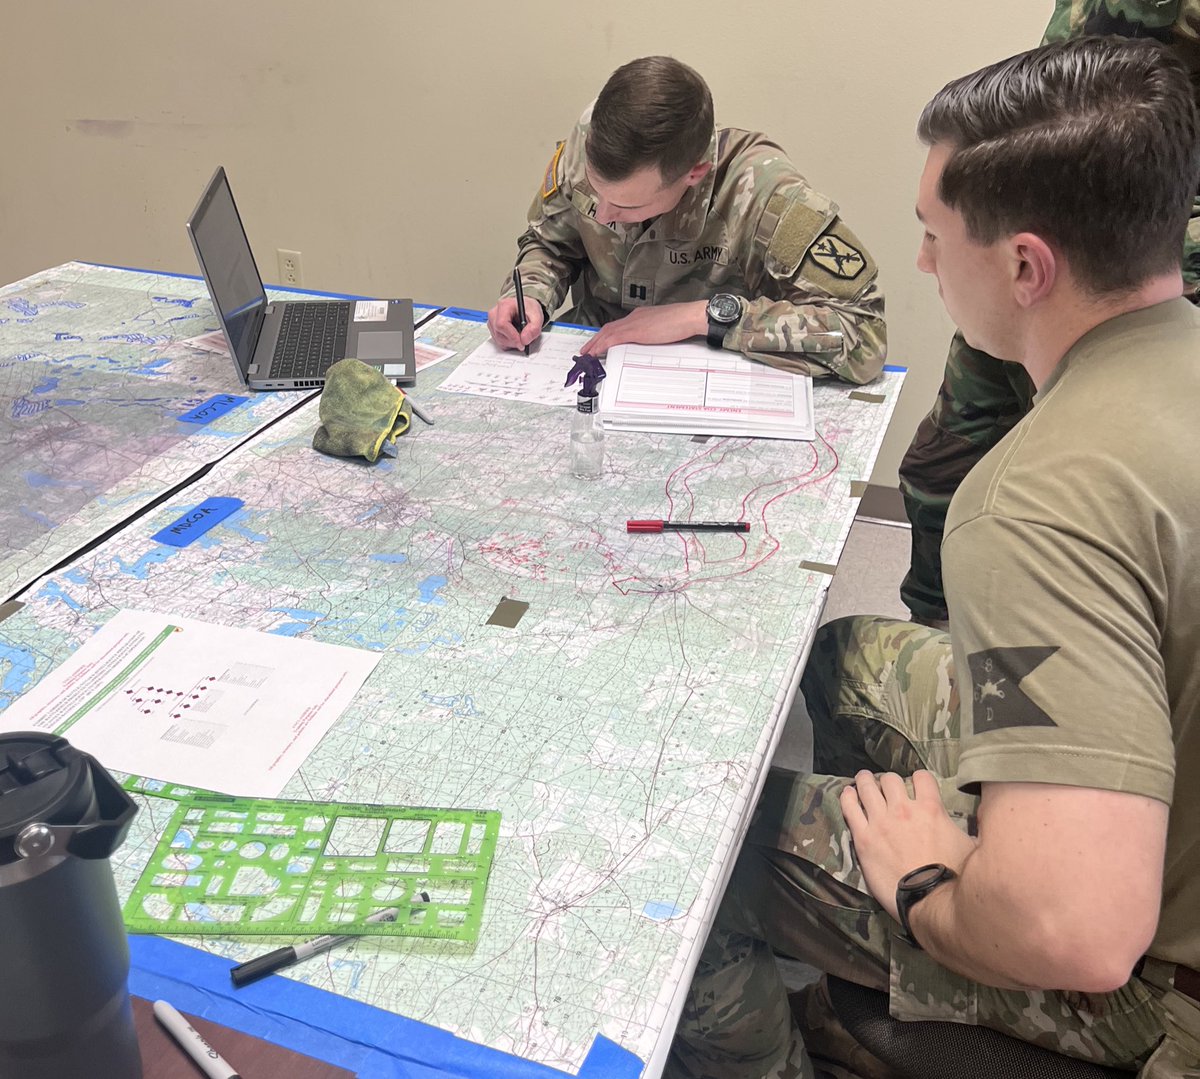 For a newly assembled squadron staff, the initial mission analysis stage is crucial, laying the groundwork for effective collaboration and mission success. Keys to success: 1. Speak the common language - Doctrine 📚. 2. Create a common operating picture - Analog Map 🗺️